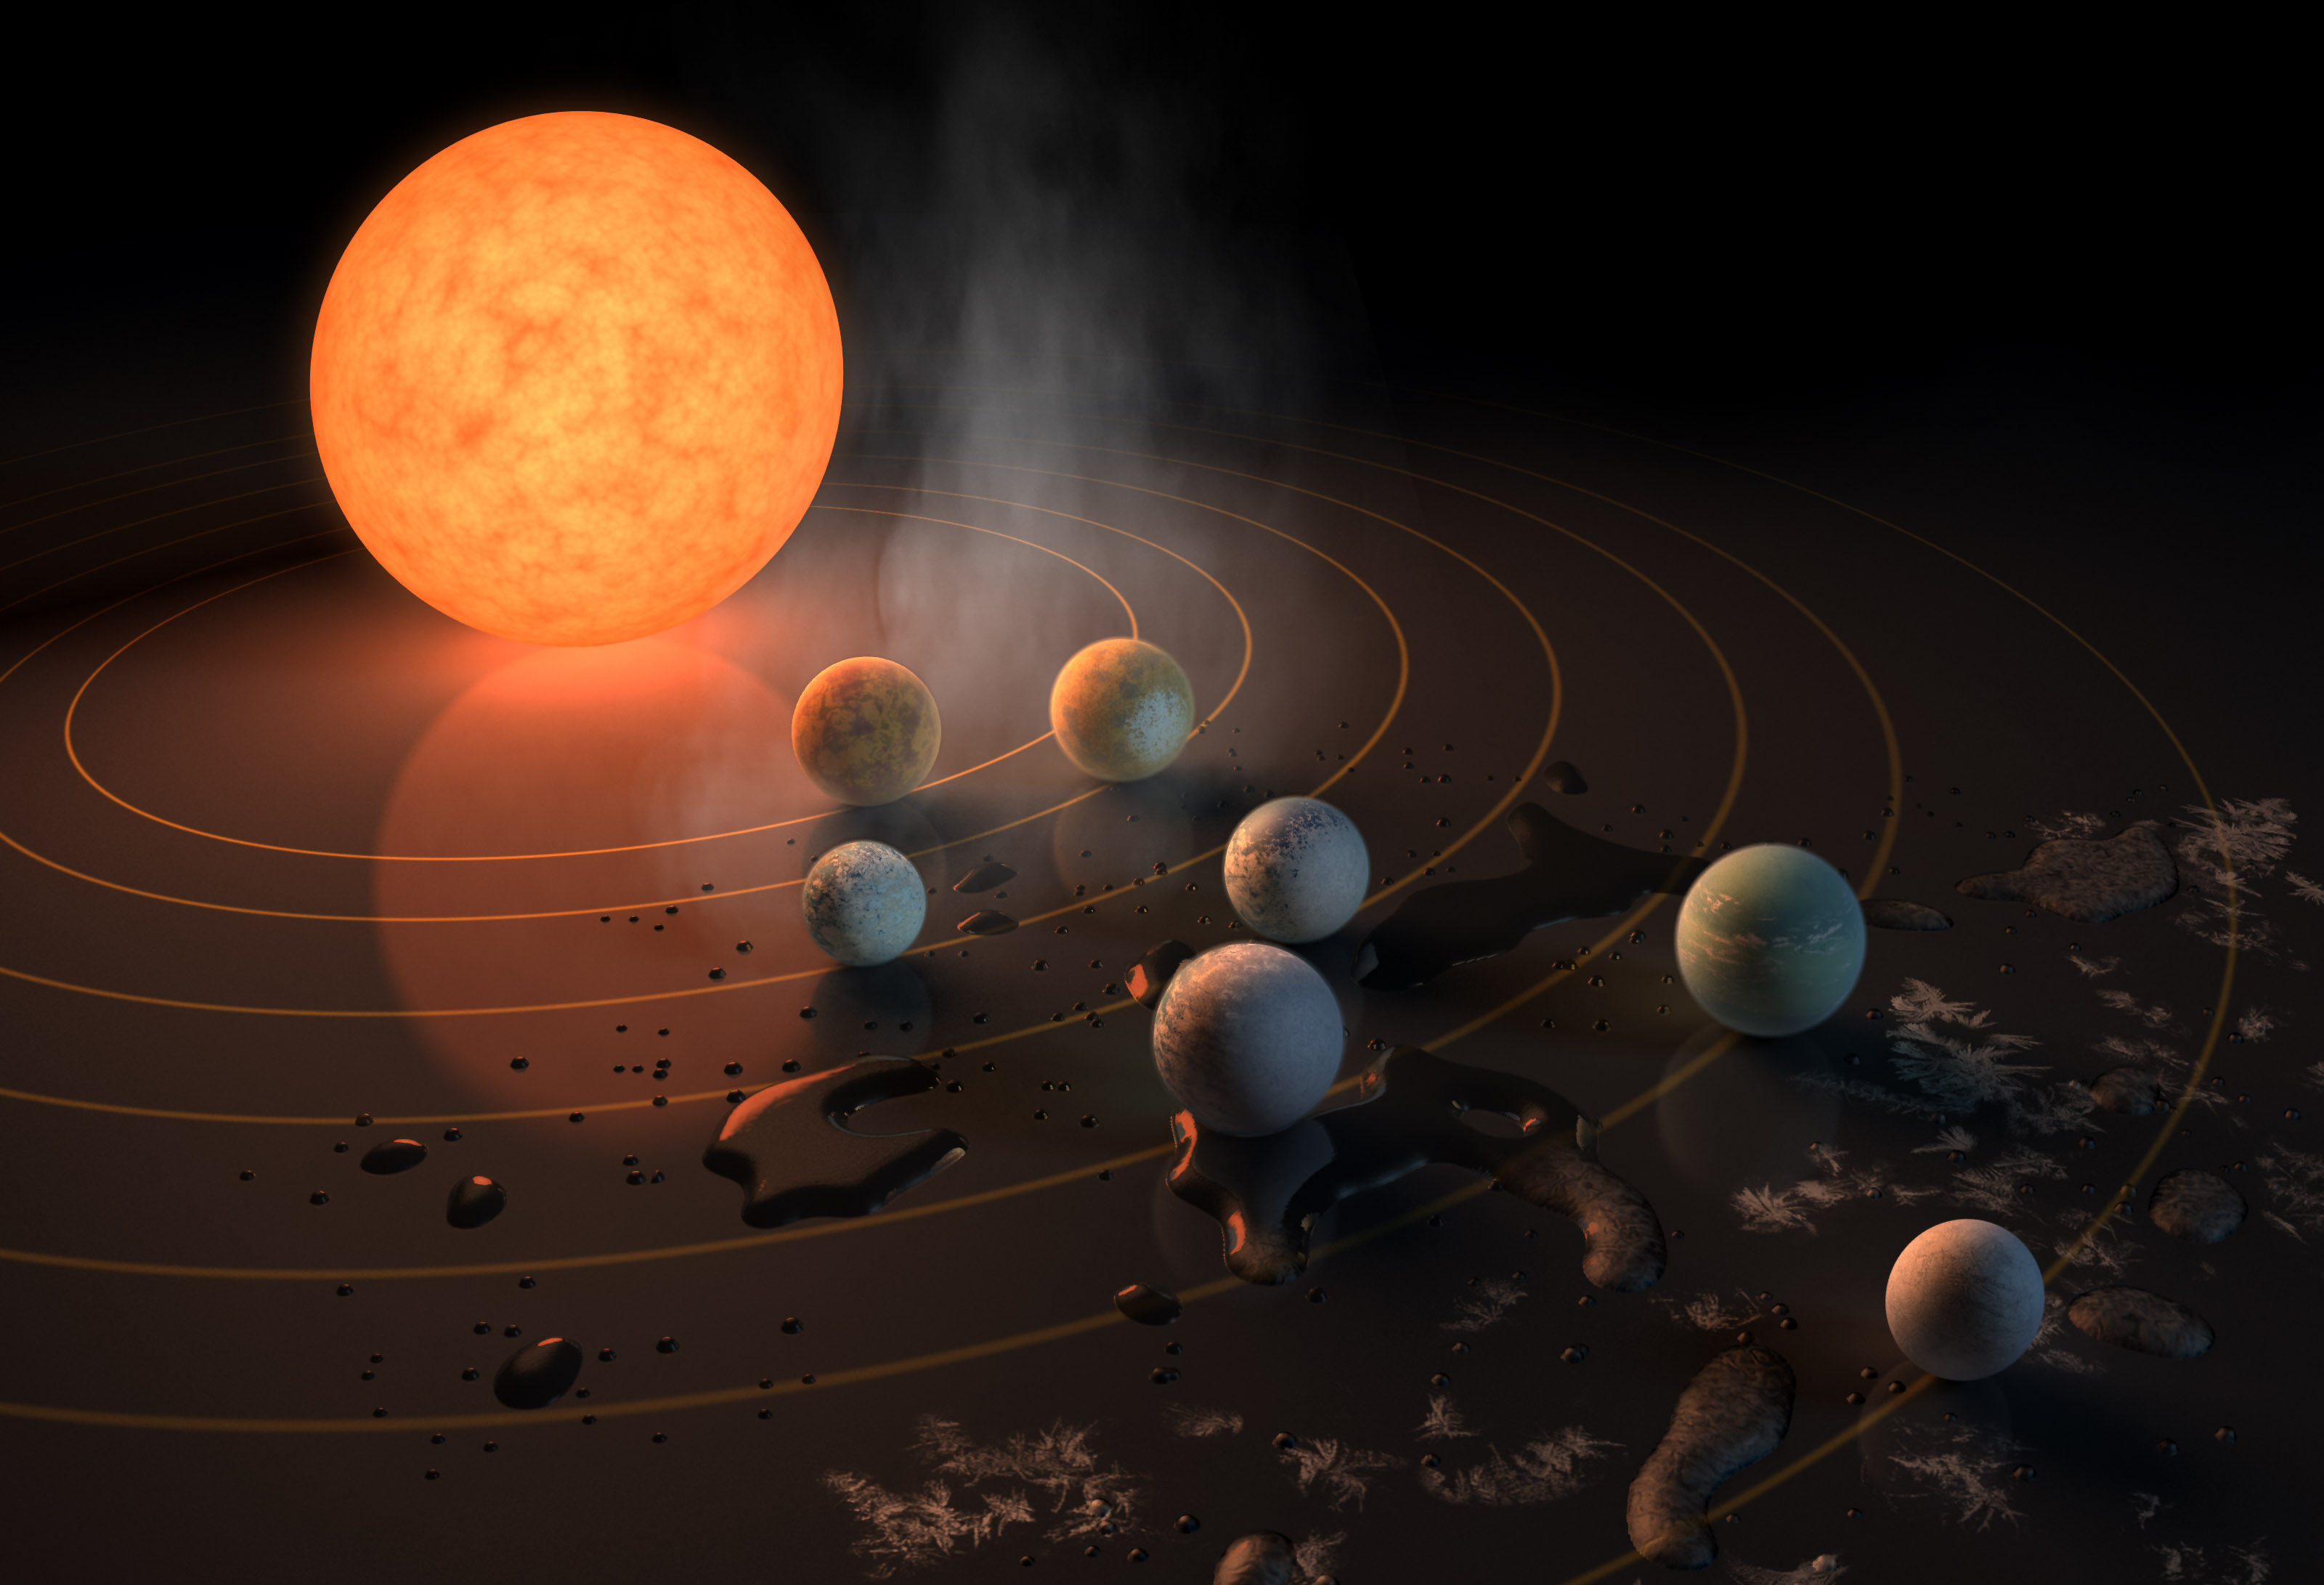 The TRAPPIST-1 star, an ultra-cool dwarf, has seven Earth-size planets orbiting it. (NASA/JPL-Caltech)